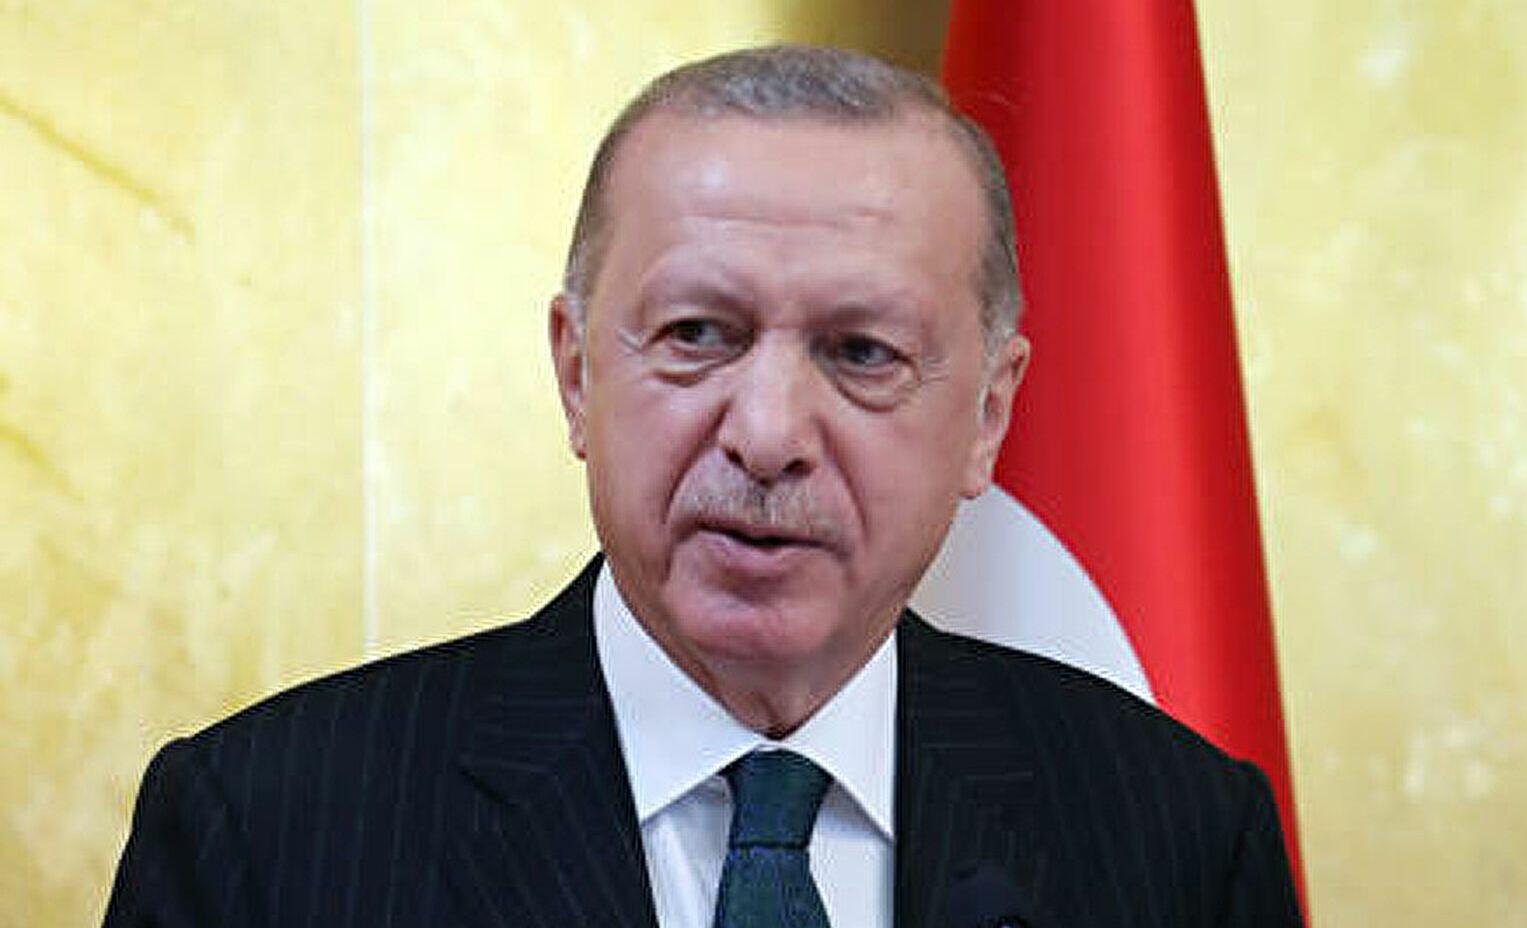 Erdogan will demand a solution to 3 main issues in Europe